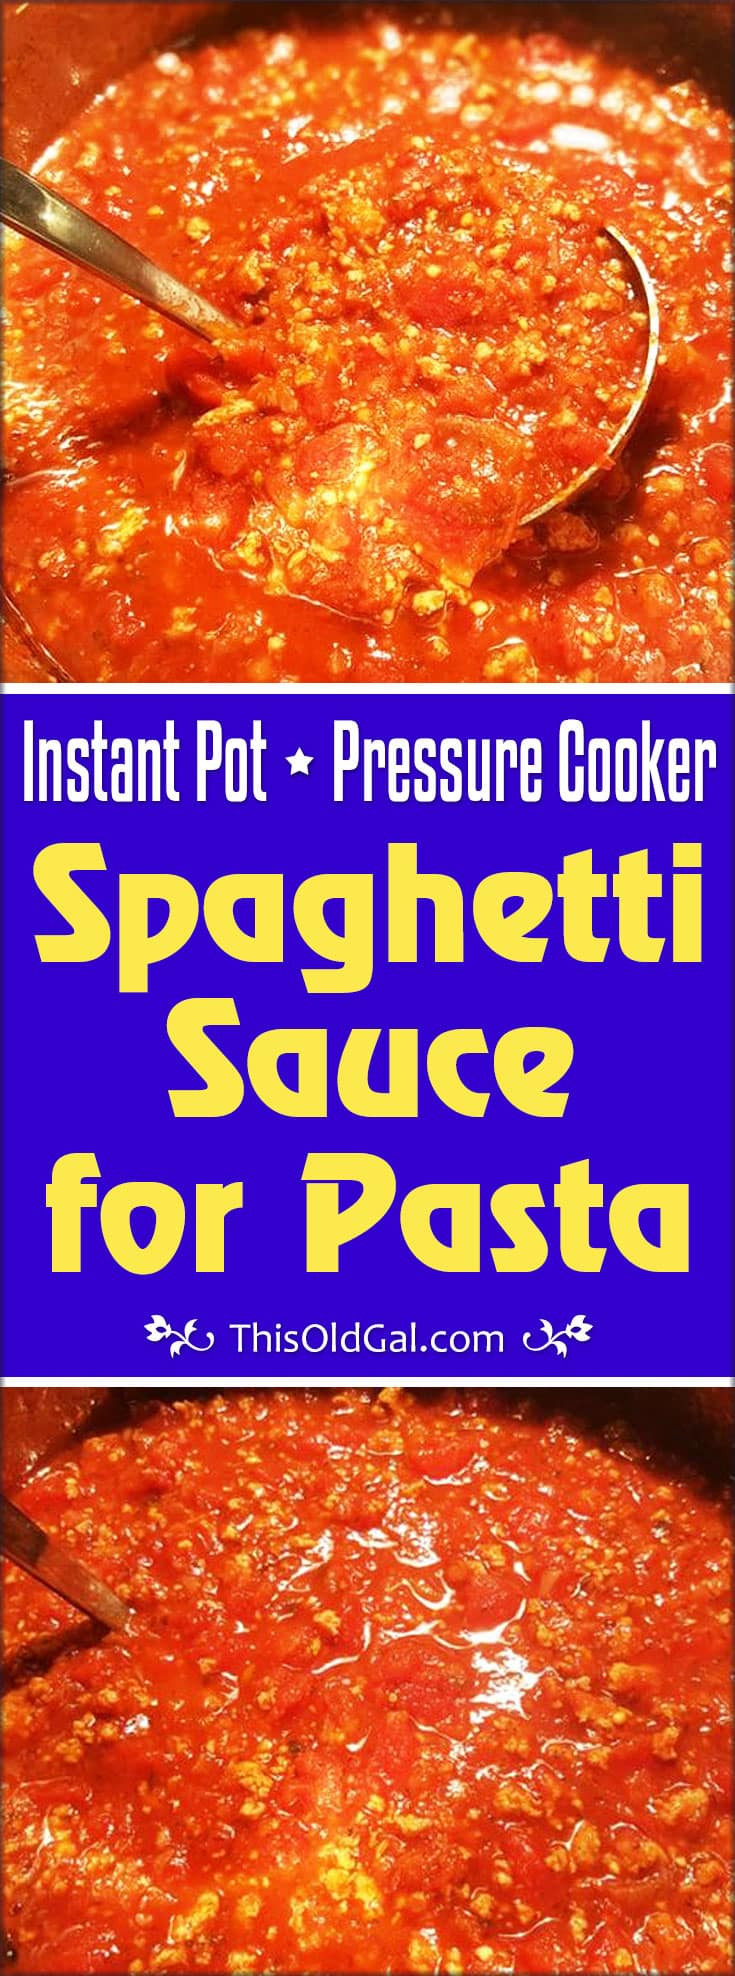 Pressure Cooker Spaghetti And Meat Sauce
 Pressure Cooker Spaghetti Sauce for Pasta